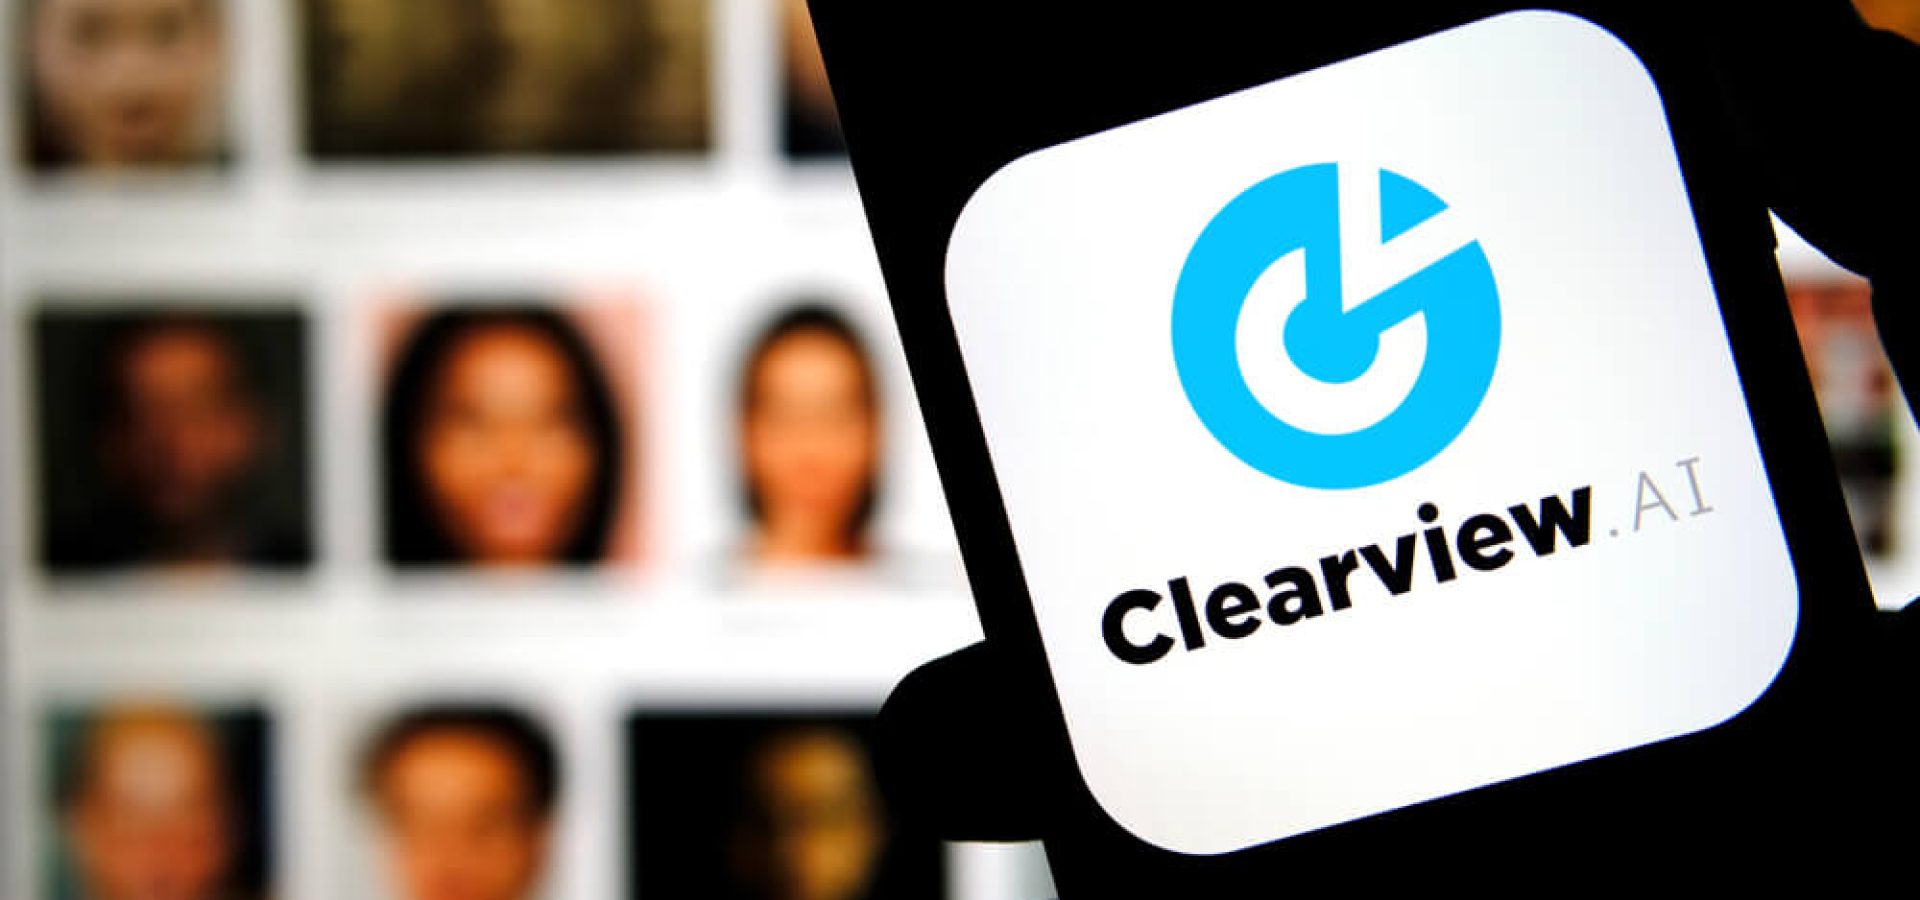 Clearview AI company logo on the smartphone screen.